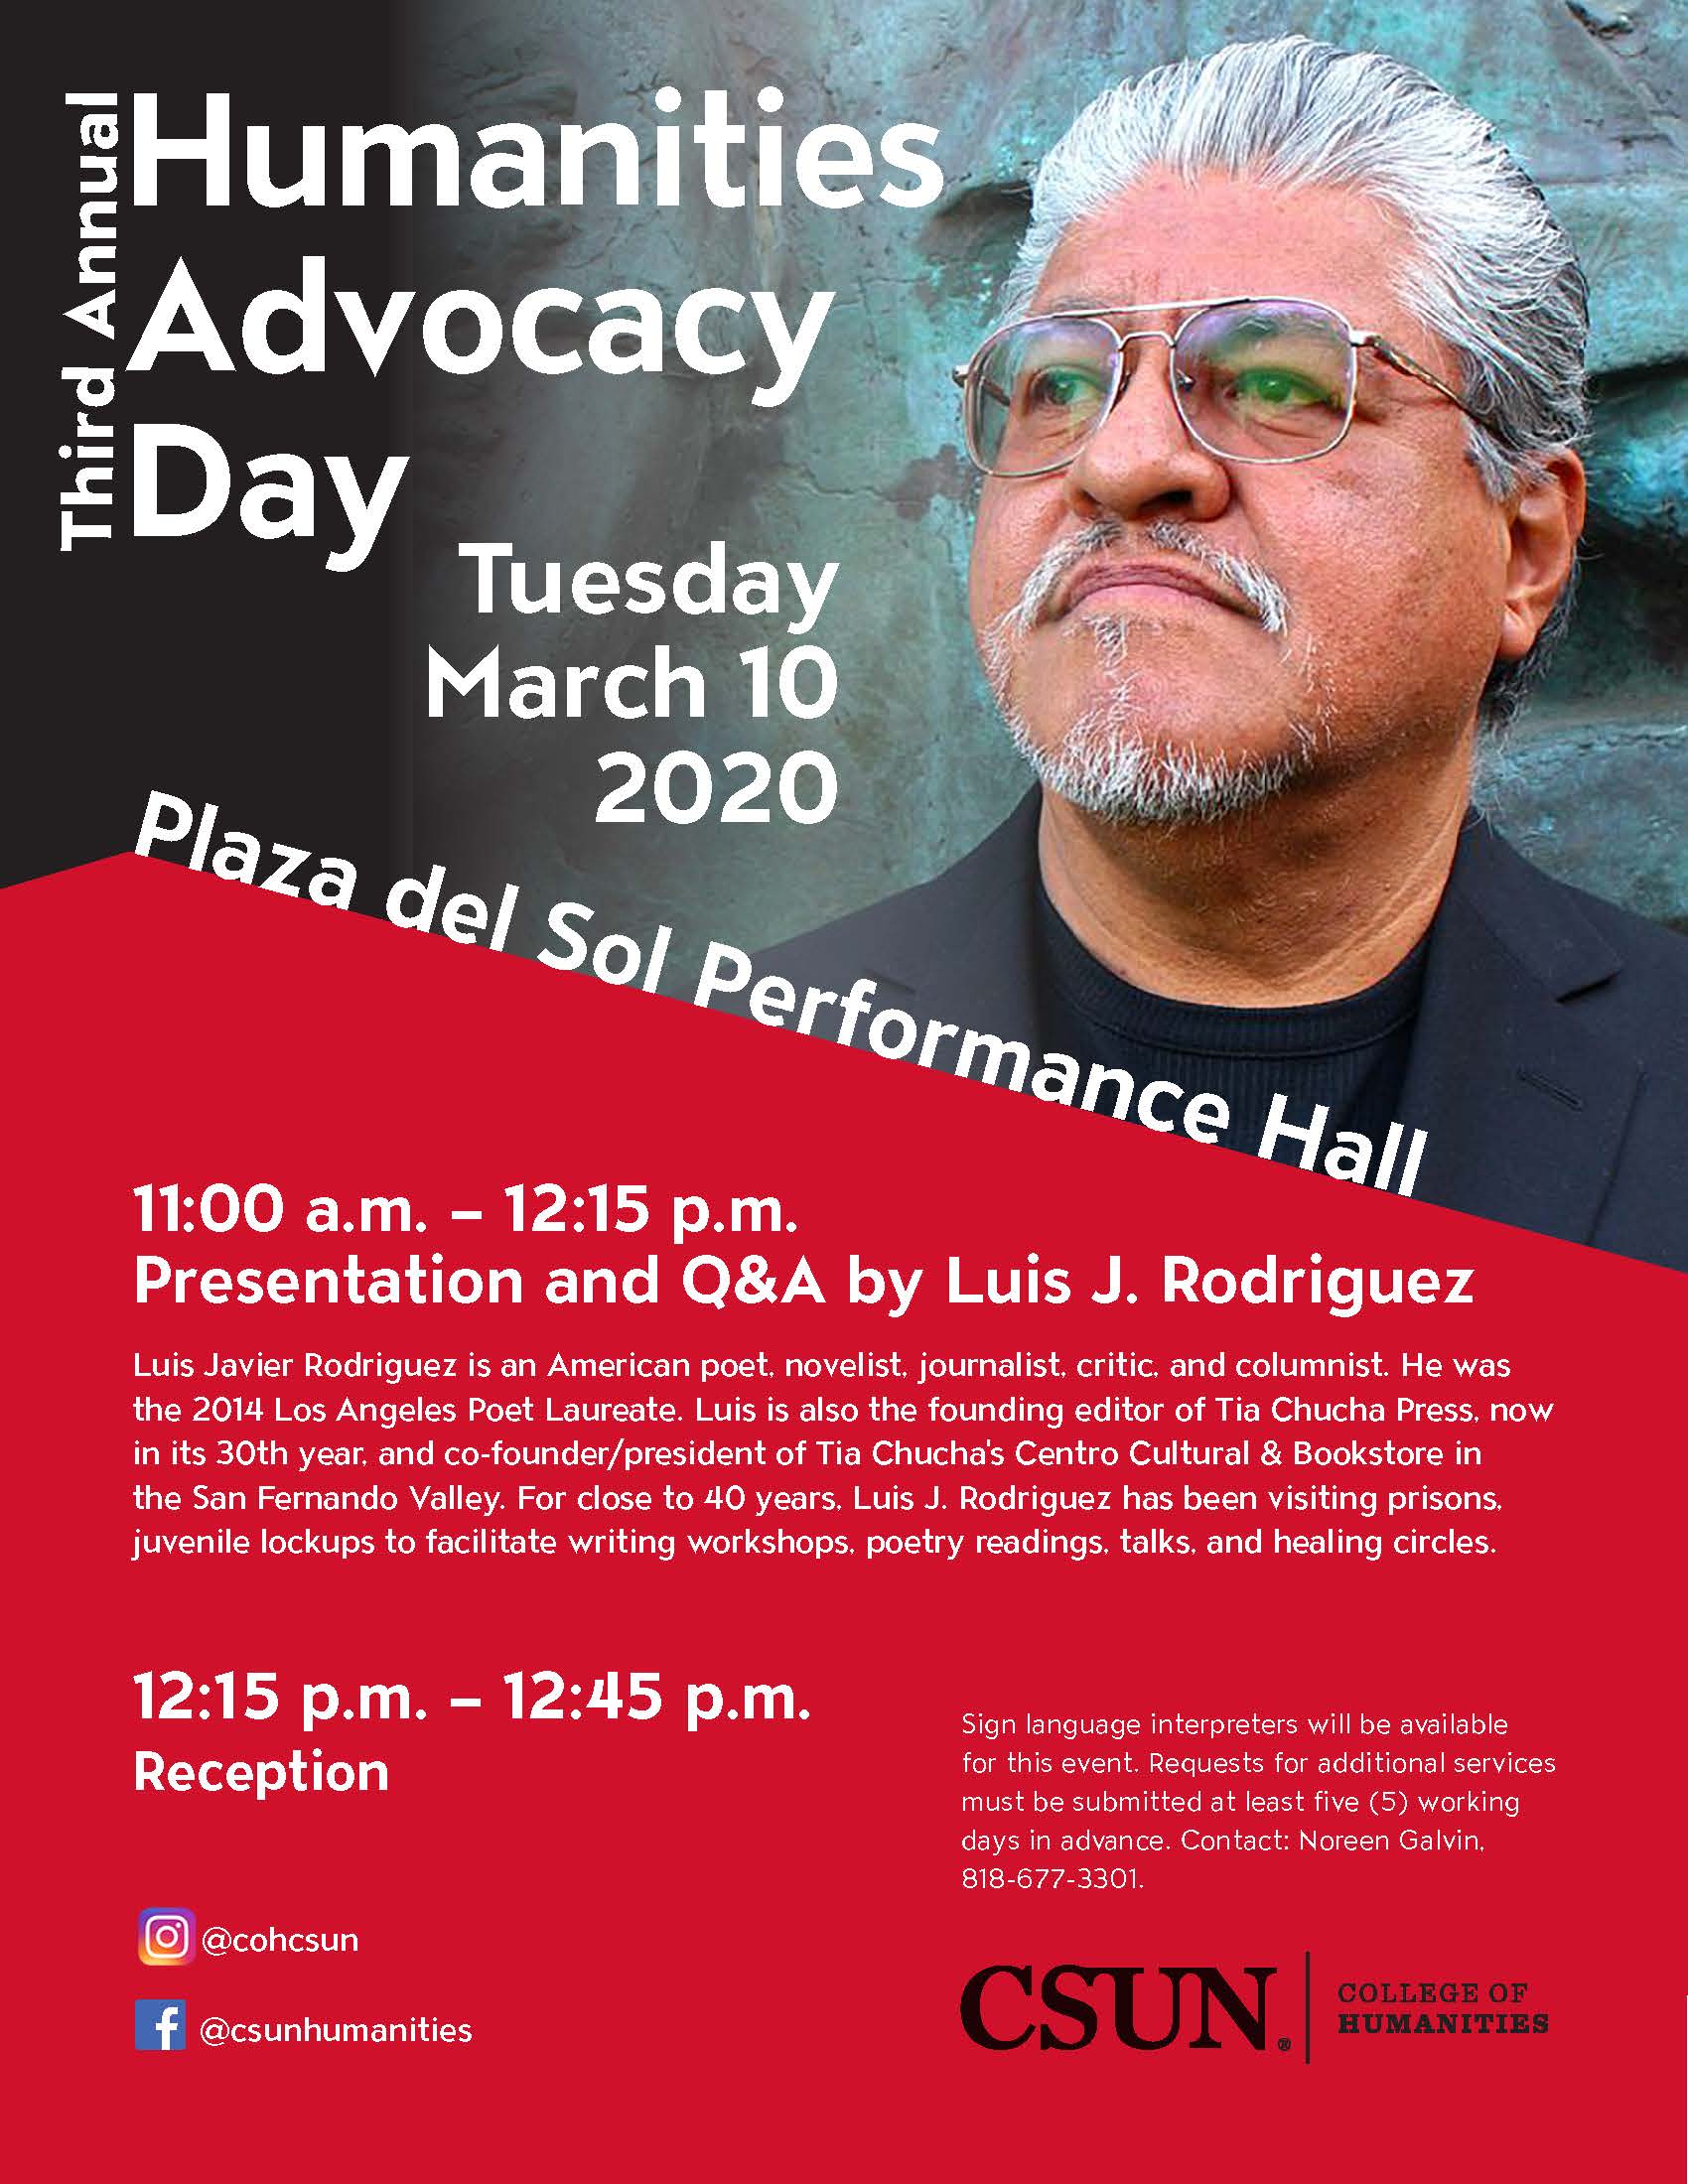 Humanities Advocacy Day March 10, 2020 11 am to 12:45 pm